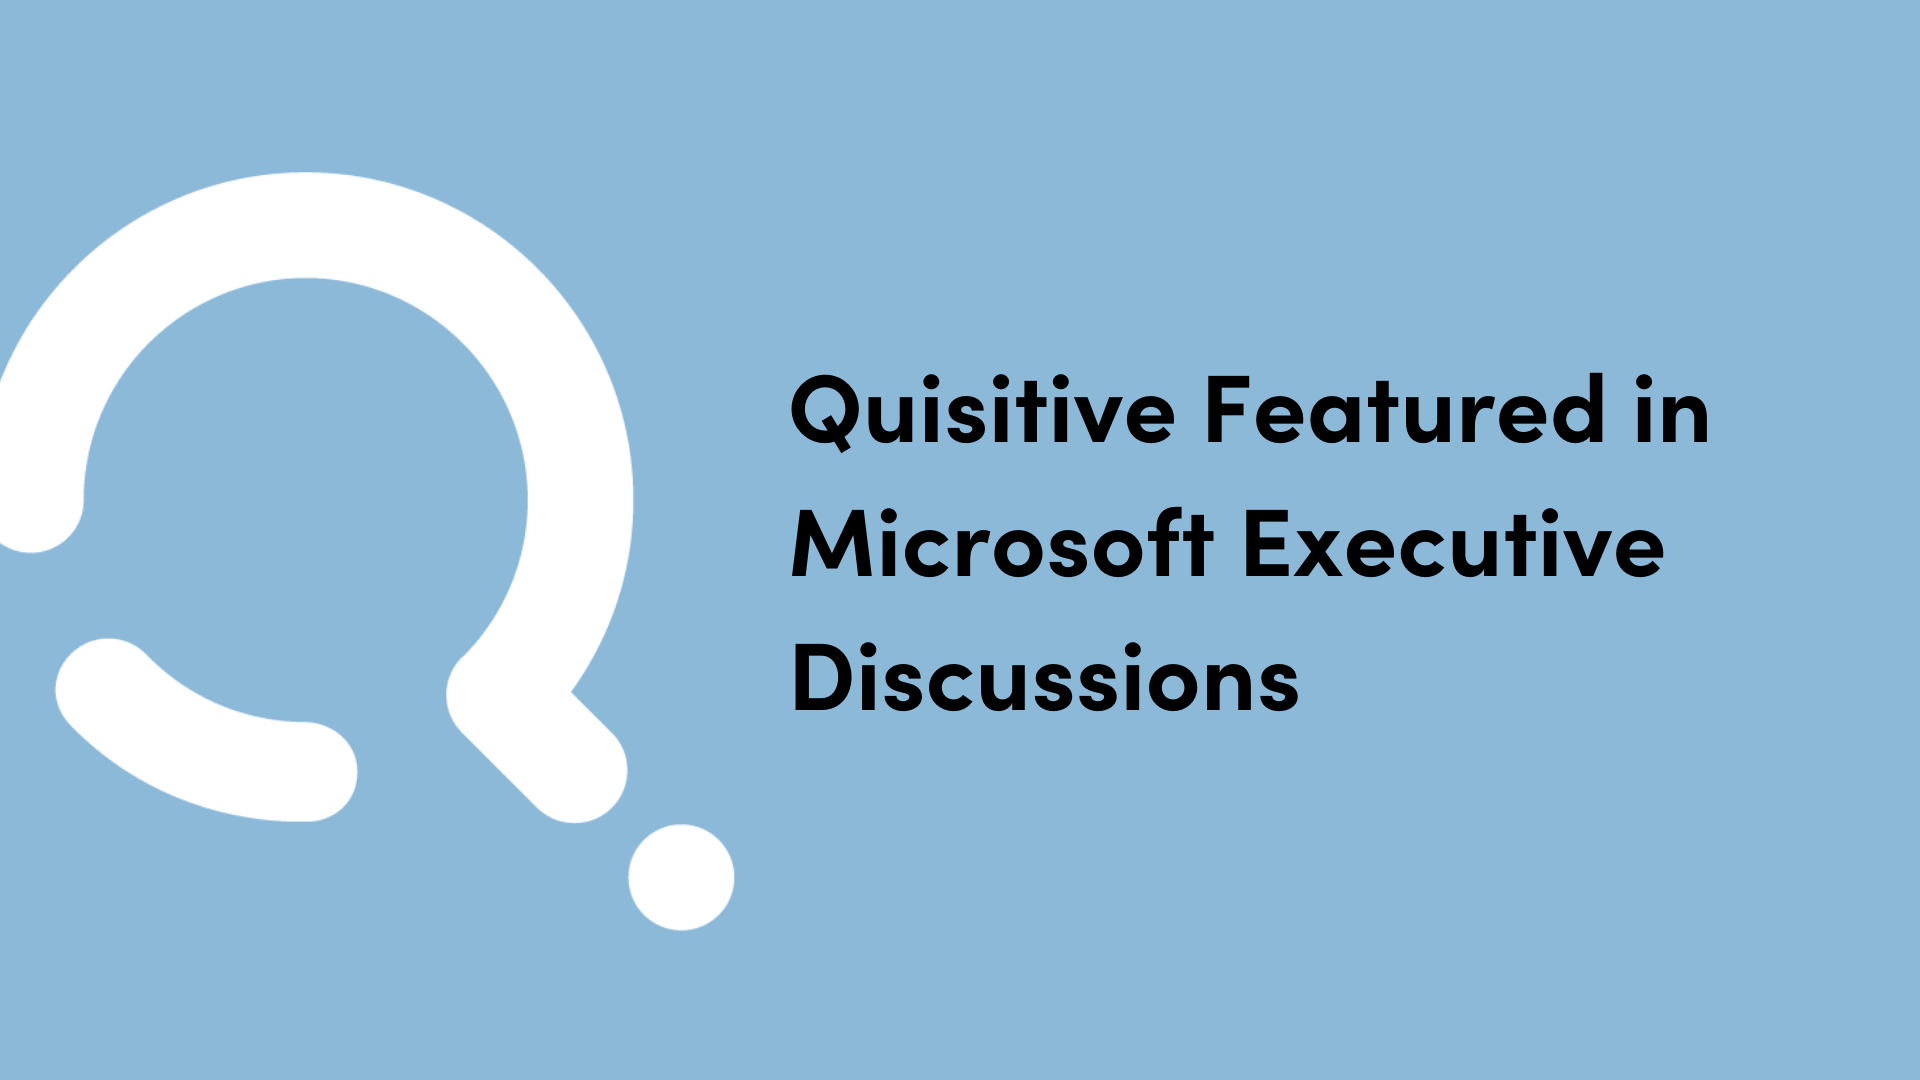 Quisitive logo on white background with text that reads Quisitive Featured in Microsoft Executive Discussions